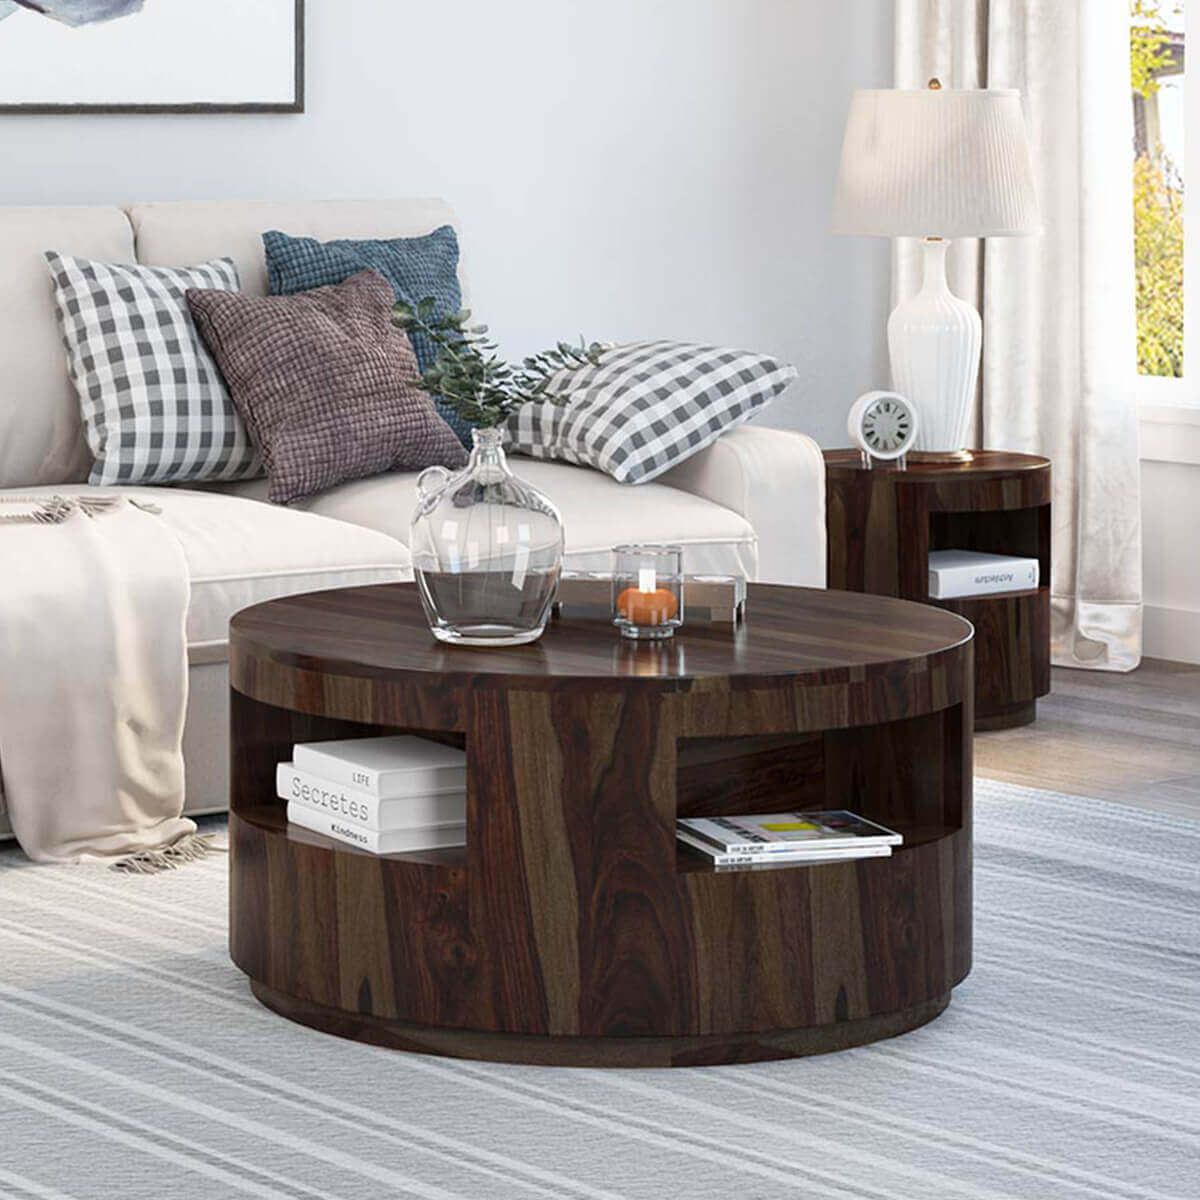 Ladonia Rustic Solid Wood Round Coffee Table With Shelves Within Wood Coffee Tables (View 11 of 15)